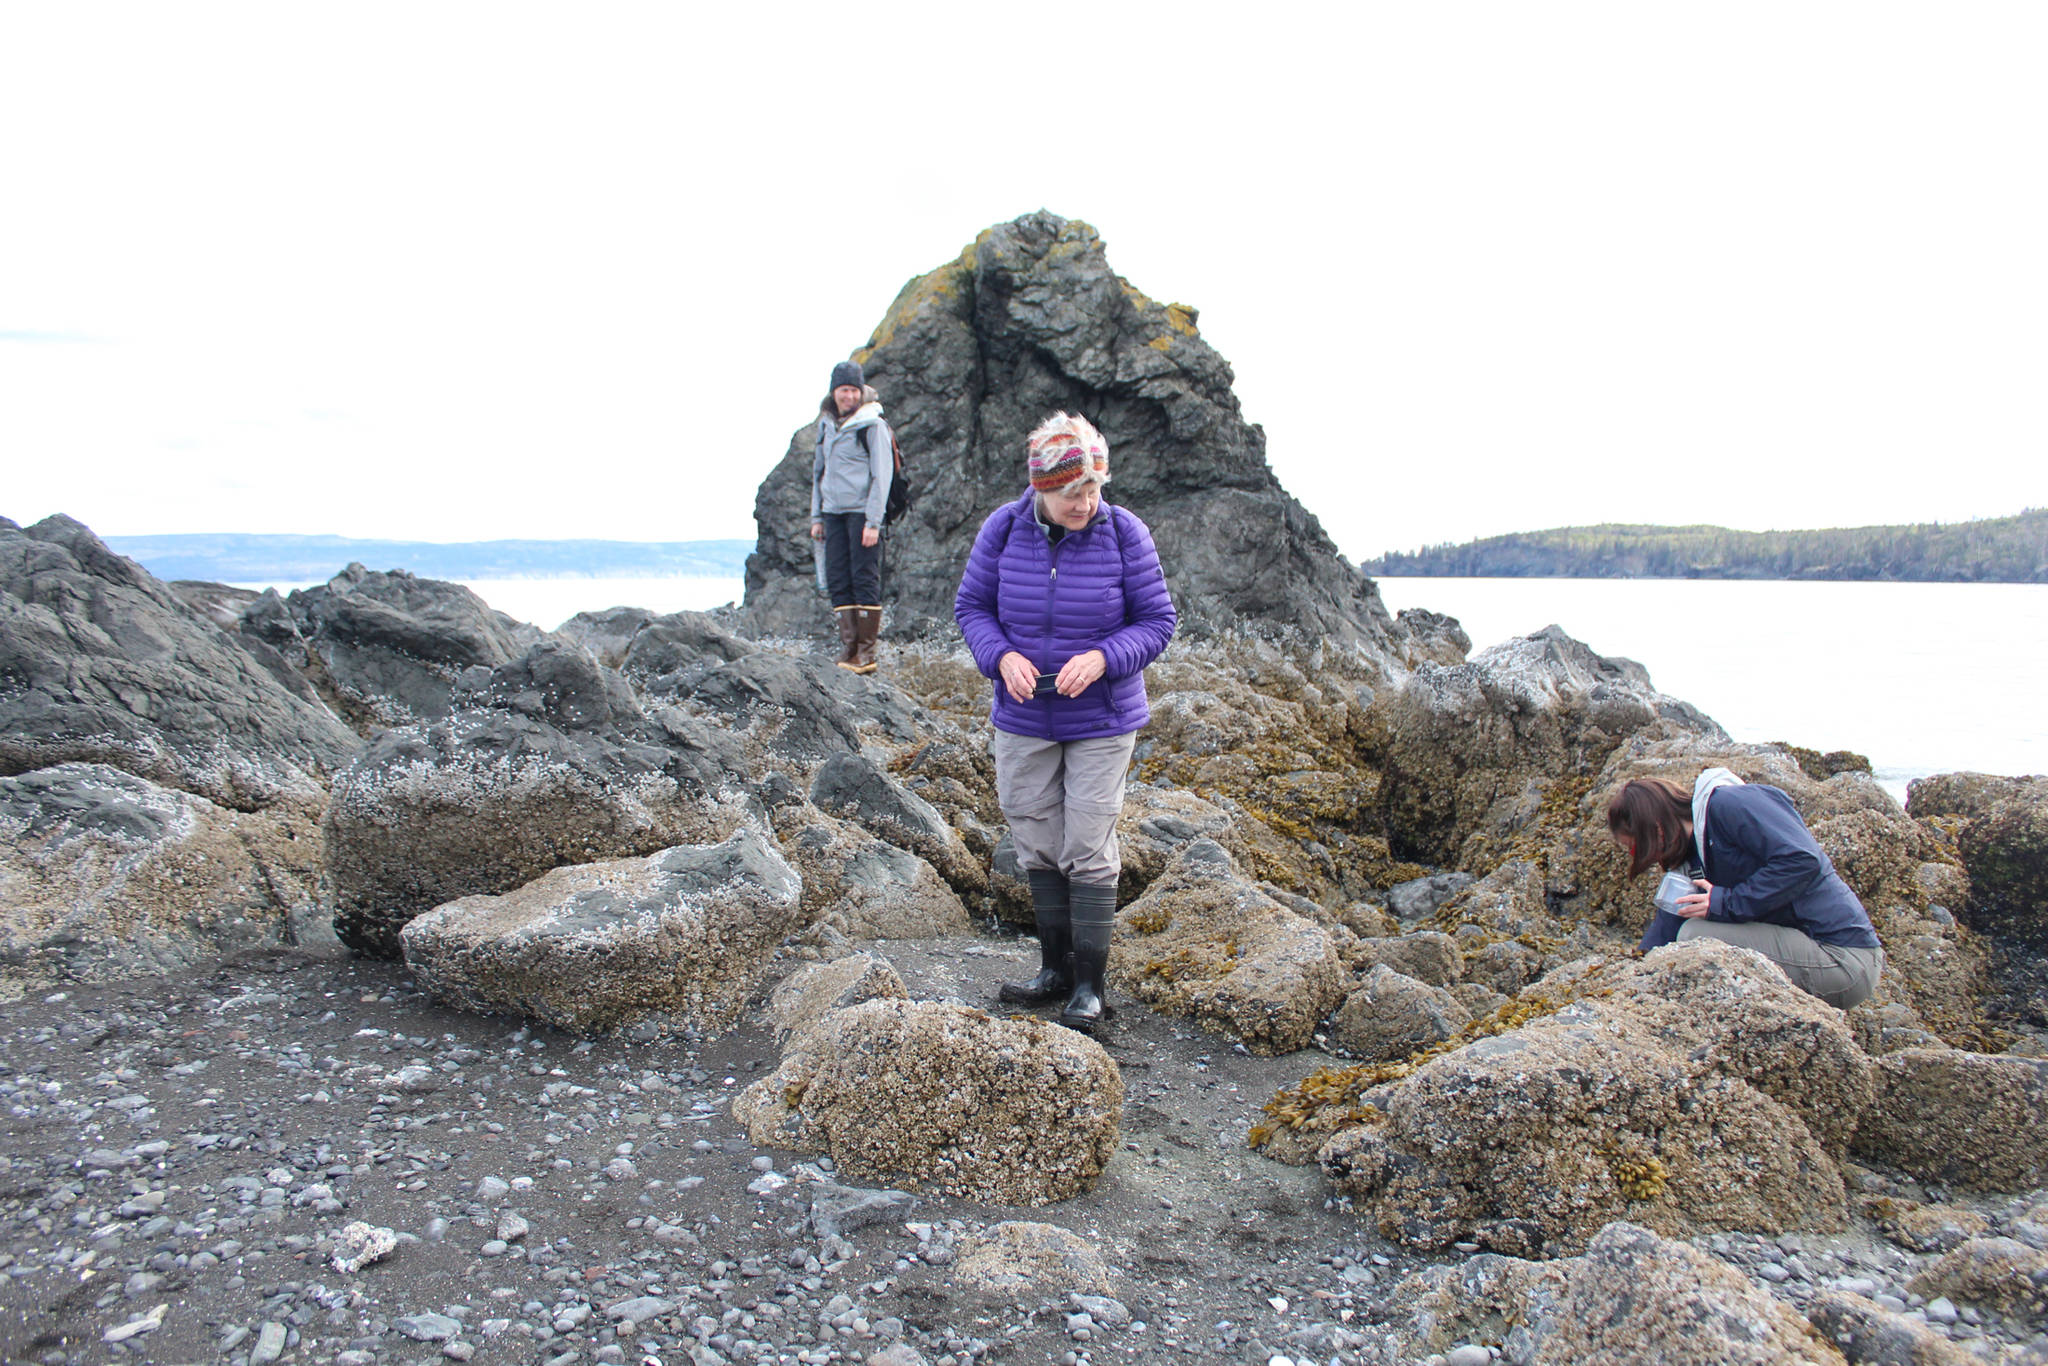 Saskia Esslinger (left), Marcia Kuszmaul (middle) and Caitlin Marsteller (right) explore Otter Island during an excursion to Peterson Bay on Thursday, May 24, 2018 near Homer, Alaska. (Photo by Megan Pacer/Homer News)